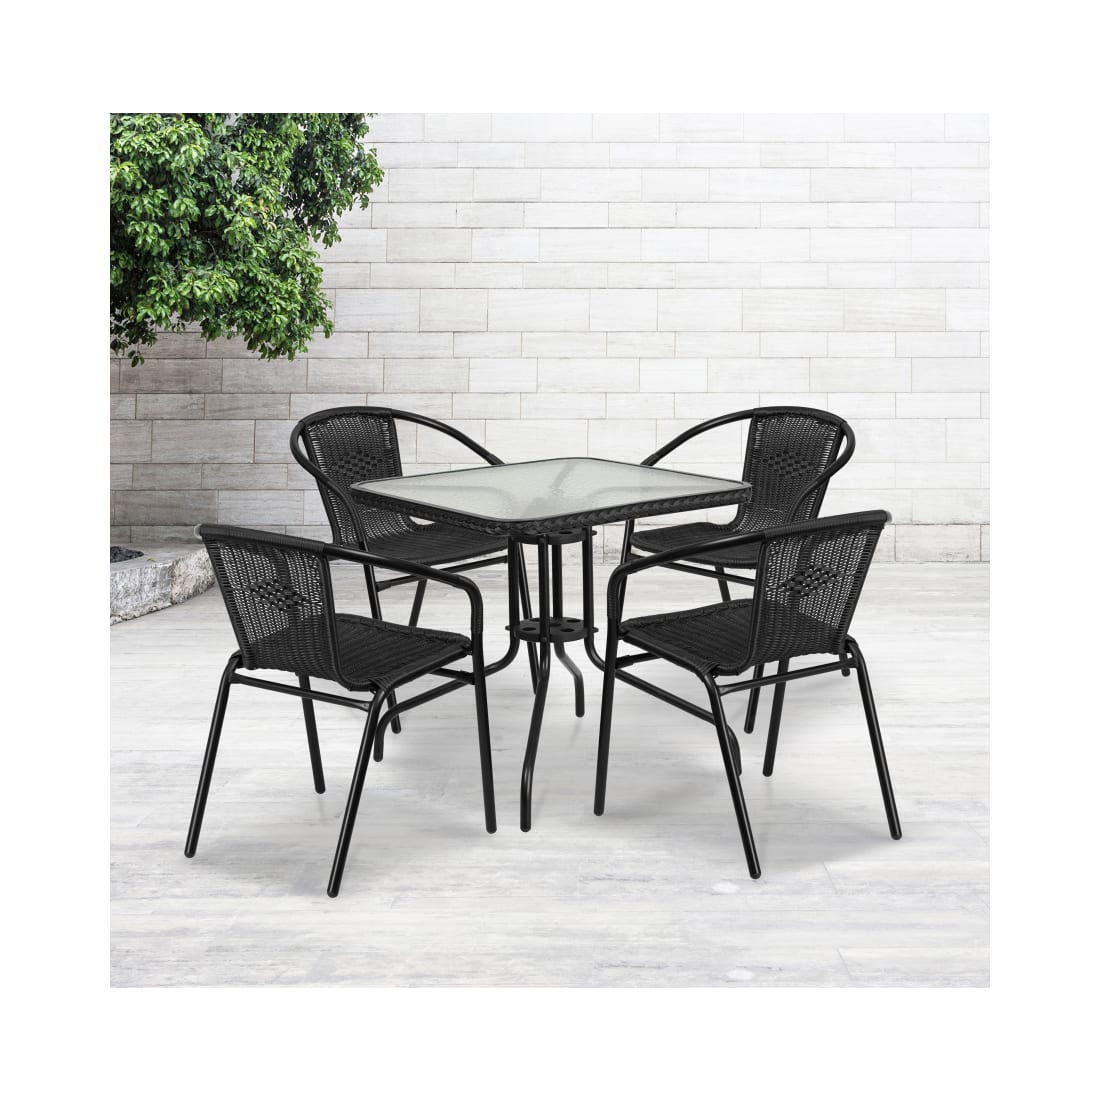 28” Square Glass Metal Table with Black Rattan Edging and 4 Black Rattan Stack Chairs